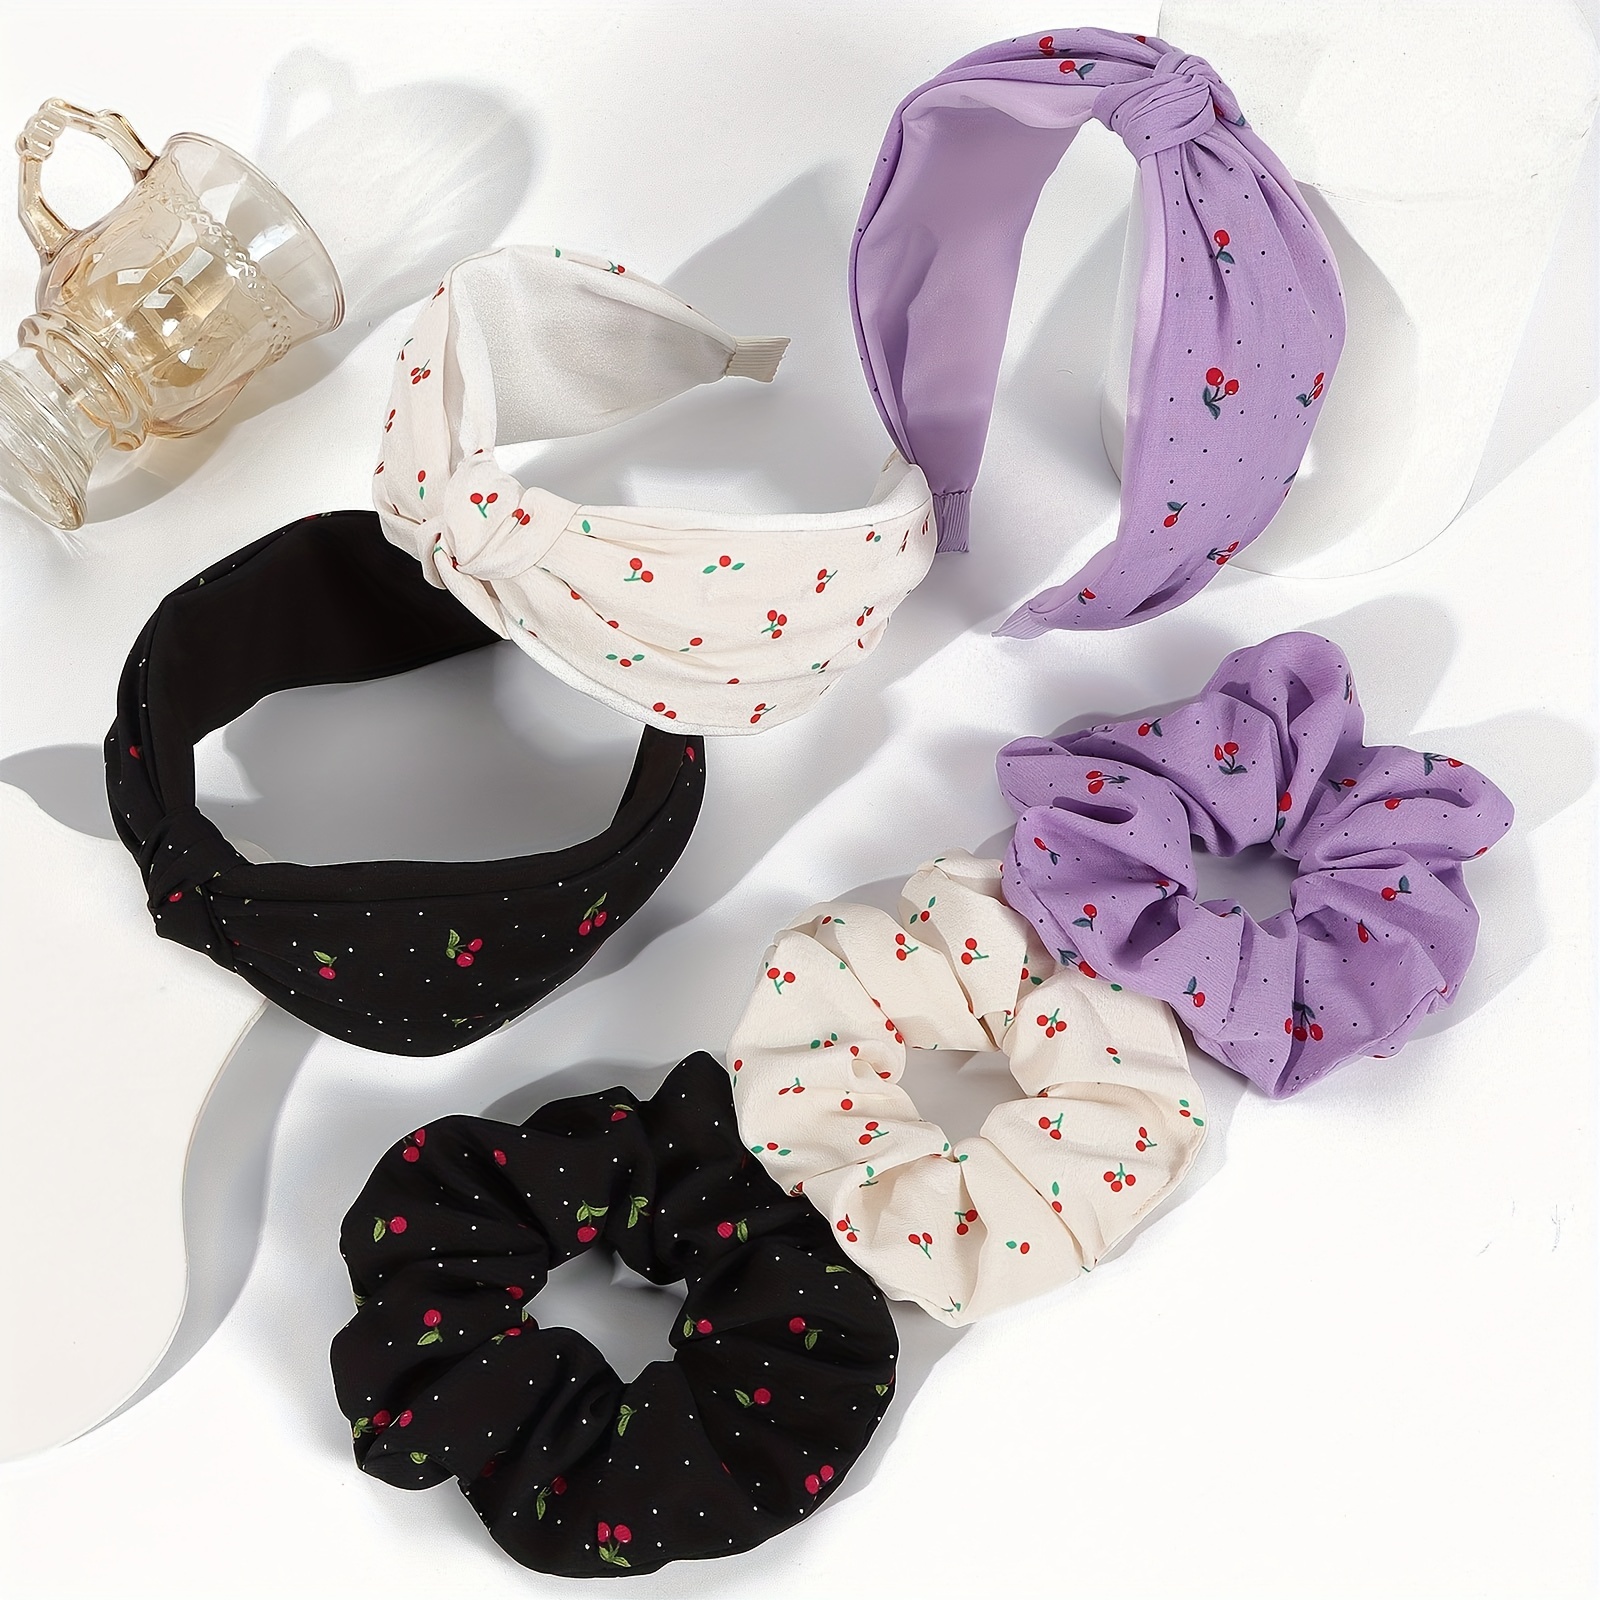 

2 Pcs/set Cherry Printed Headband Cross Top Knot Hair Bands Hair Tie Hair Accessories Set Twisted Knotted Head Wrap